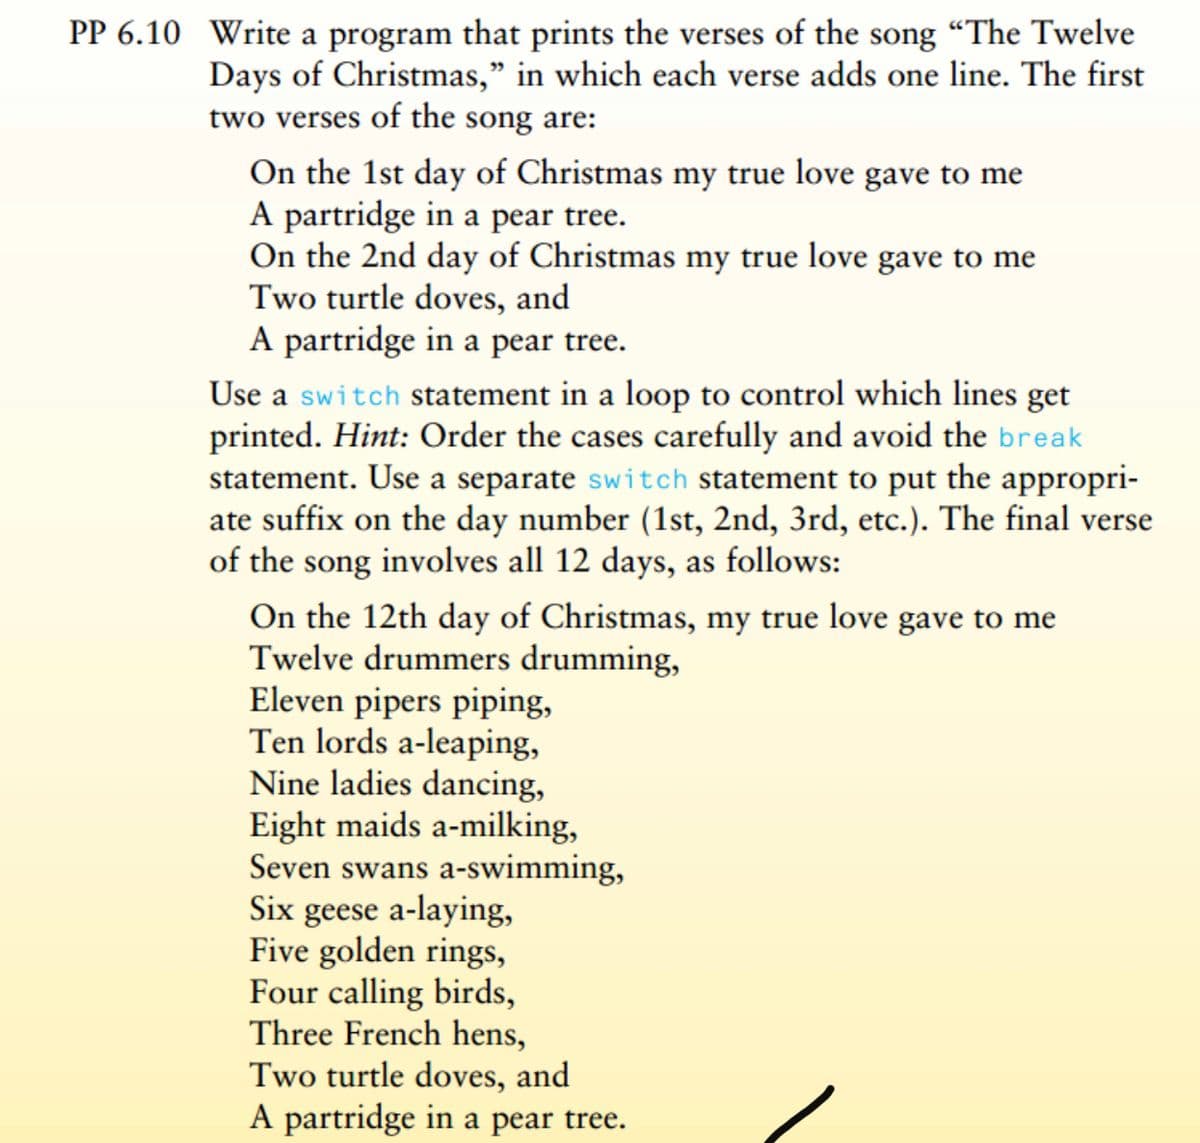 PP 6.10 Write a program that prints the verses of the song "The Twelve
Days of Christmas," in which each verse adds one line. The first
two verses of the song are:
On the 1st day of Christmas my true love gave to me
A partridge in a pear tree.
On the 2nd day of Christmas my true love gave to me
Two turtle doves, and
A partridge in a pear tree.
Use a switch statement in a loop to control which lines get
printed. Hint: Order the cases carefully and avoid the break
statement. Use a separate switch statement to put the appropri-
ate suffix on the day number (1st, 2nd, 3rd, etc.). The final verse
of the song involves all 12 days, as follows:
On the 12th day of Christmas, my true love gave to me
Twelve drummers drumming,
Eleven pipers piping,
Ten lords a-leaping,
Nine ladies dancing,
Eight maids a-milking,
Seven swans a-swimming,
Six geese a-laying,
Five golden rings,
Four calling birds,
Three French hens,
Two turtle doves, and
A partridge in a pear tree.
